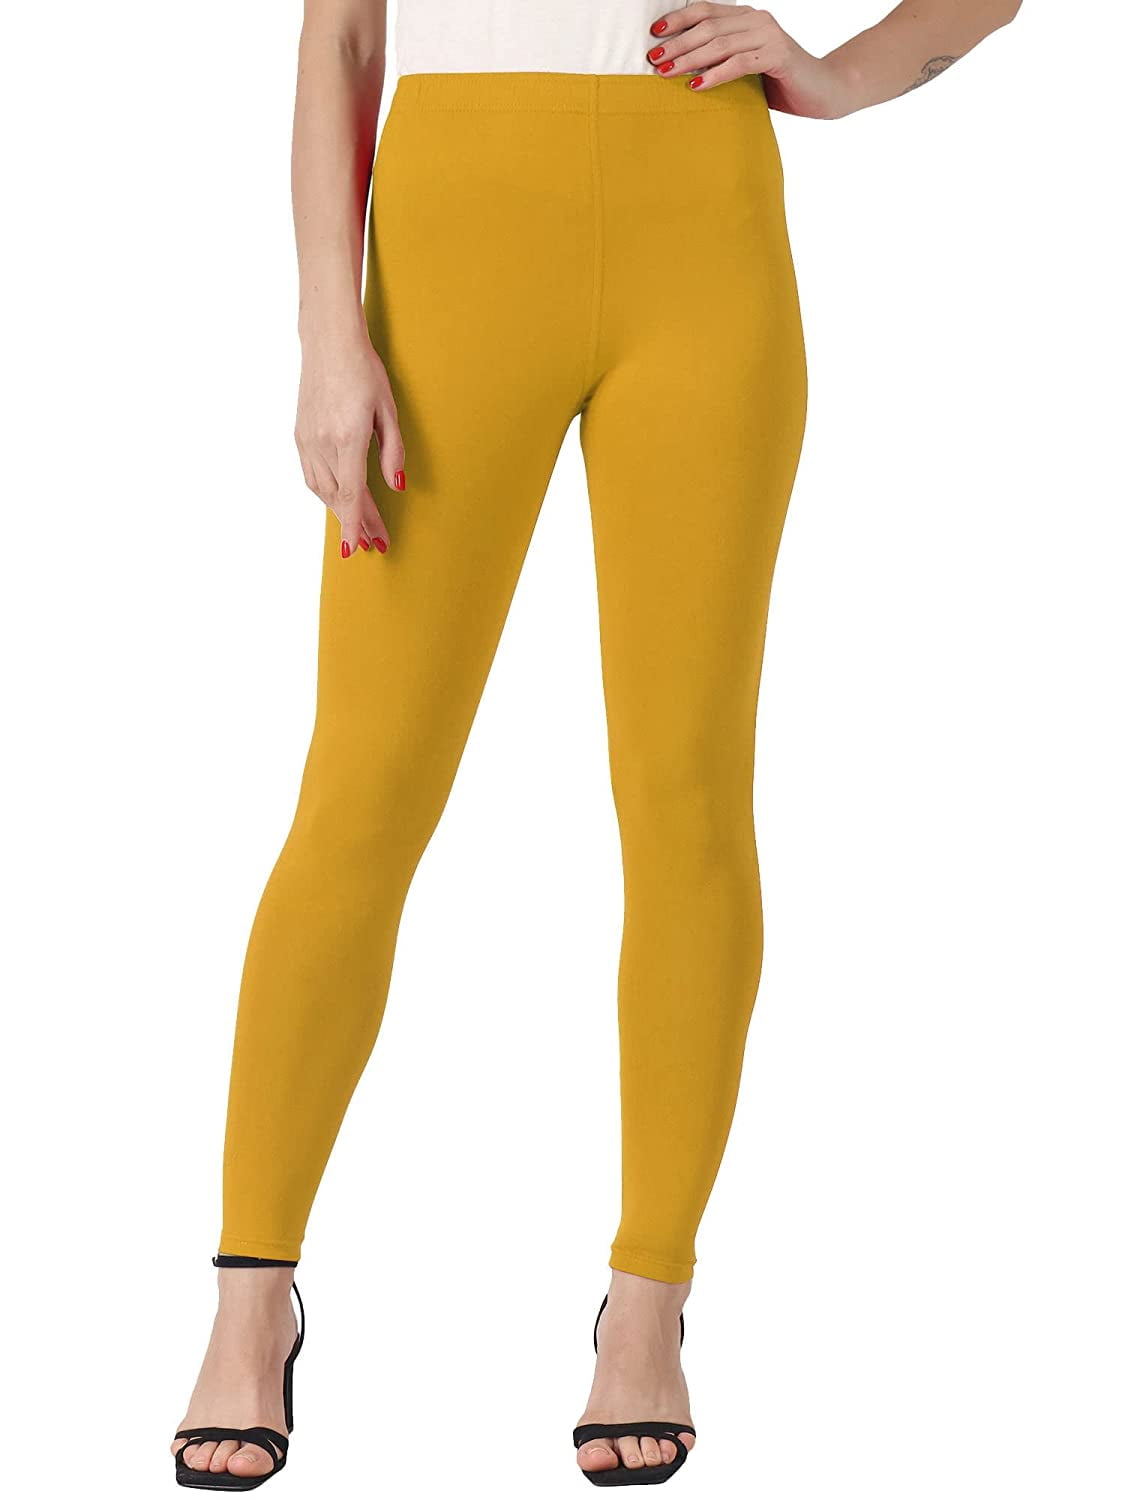 Yellow Ankle Length Premium Cotton Leggings for Women and Girls